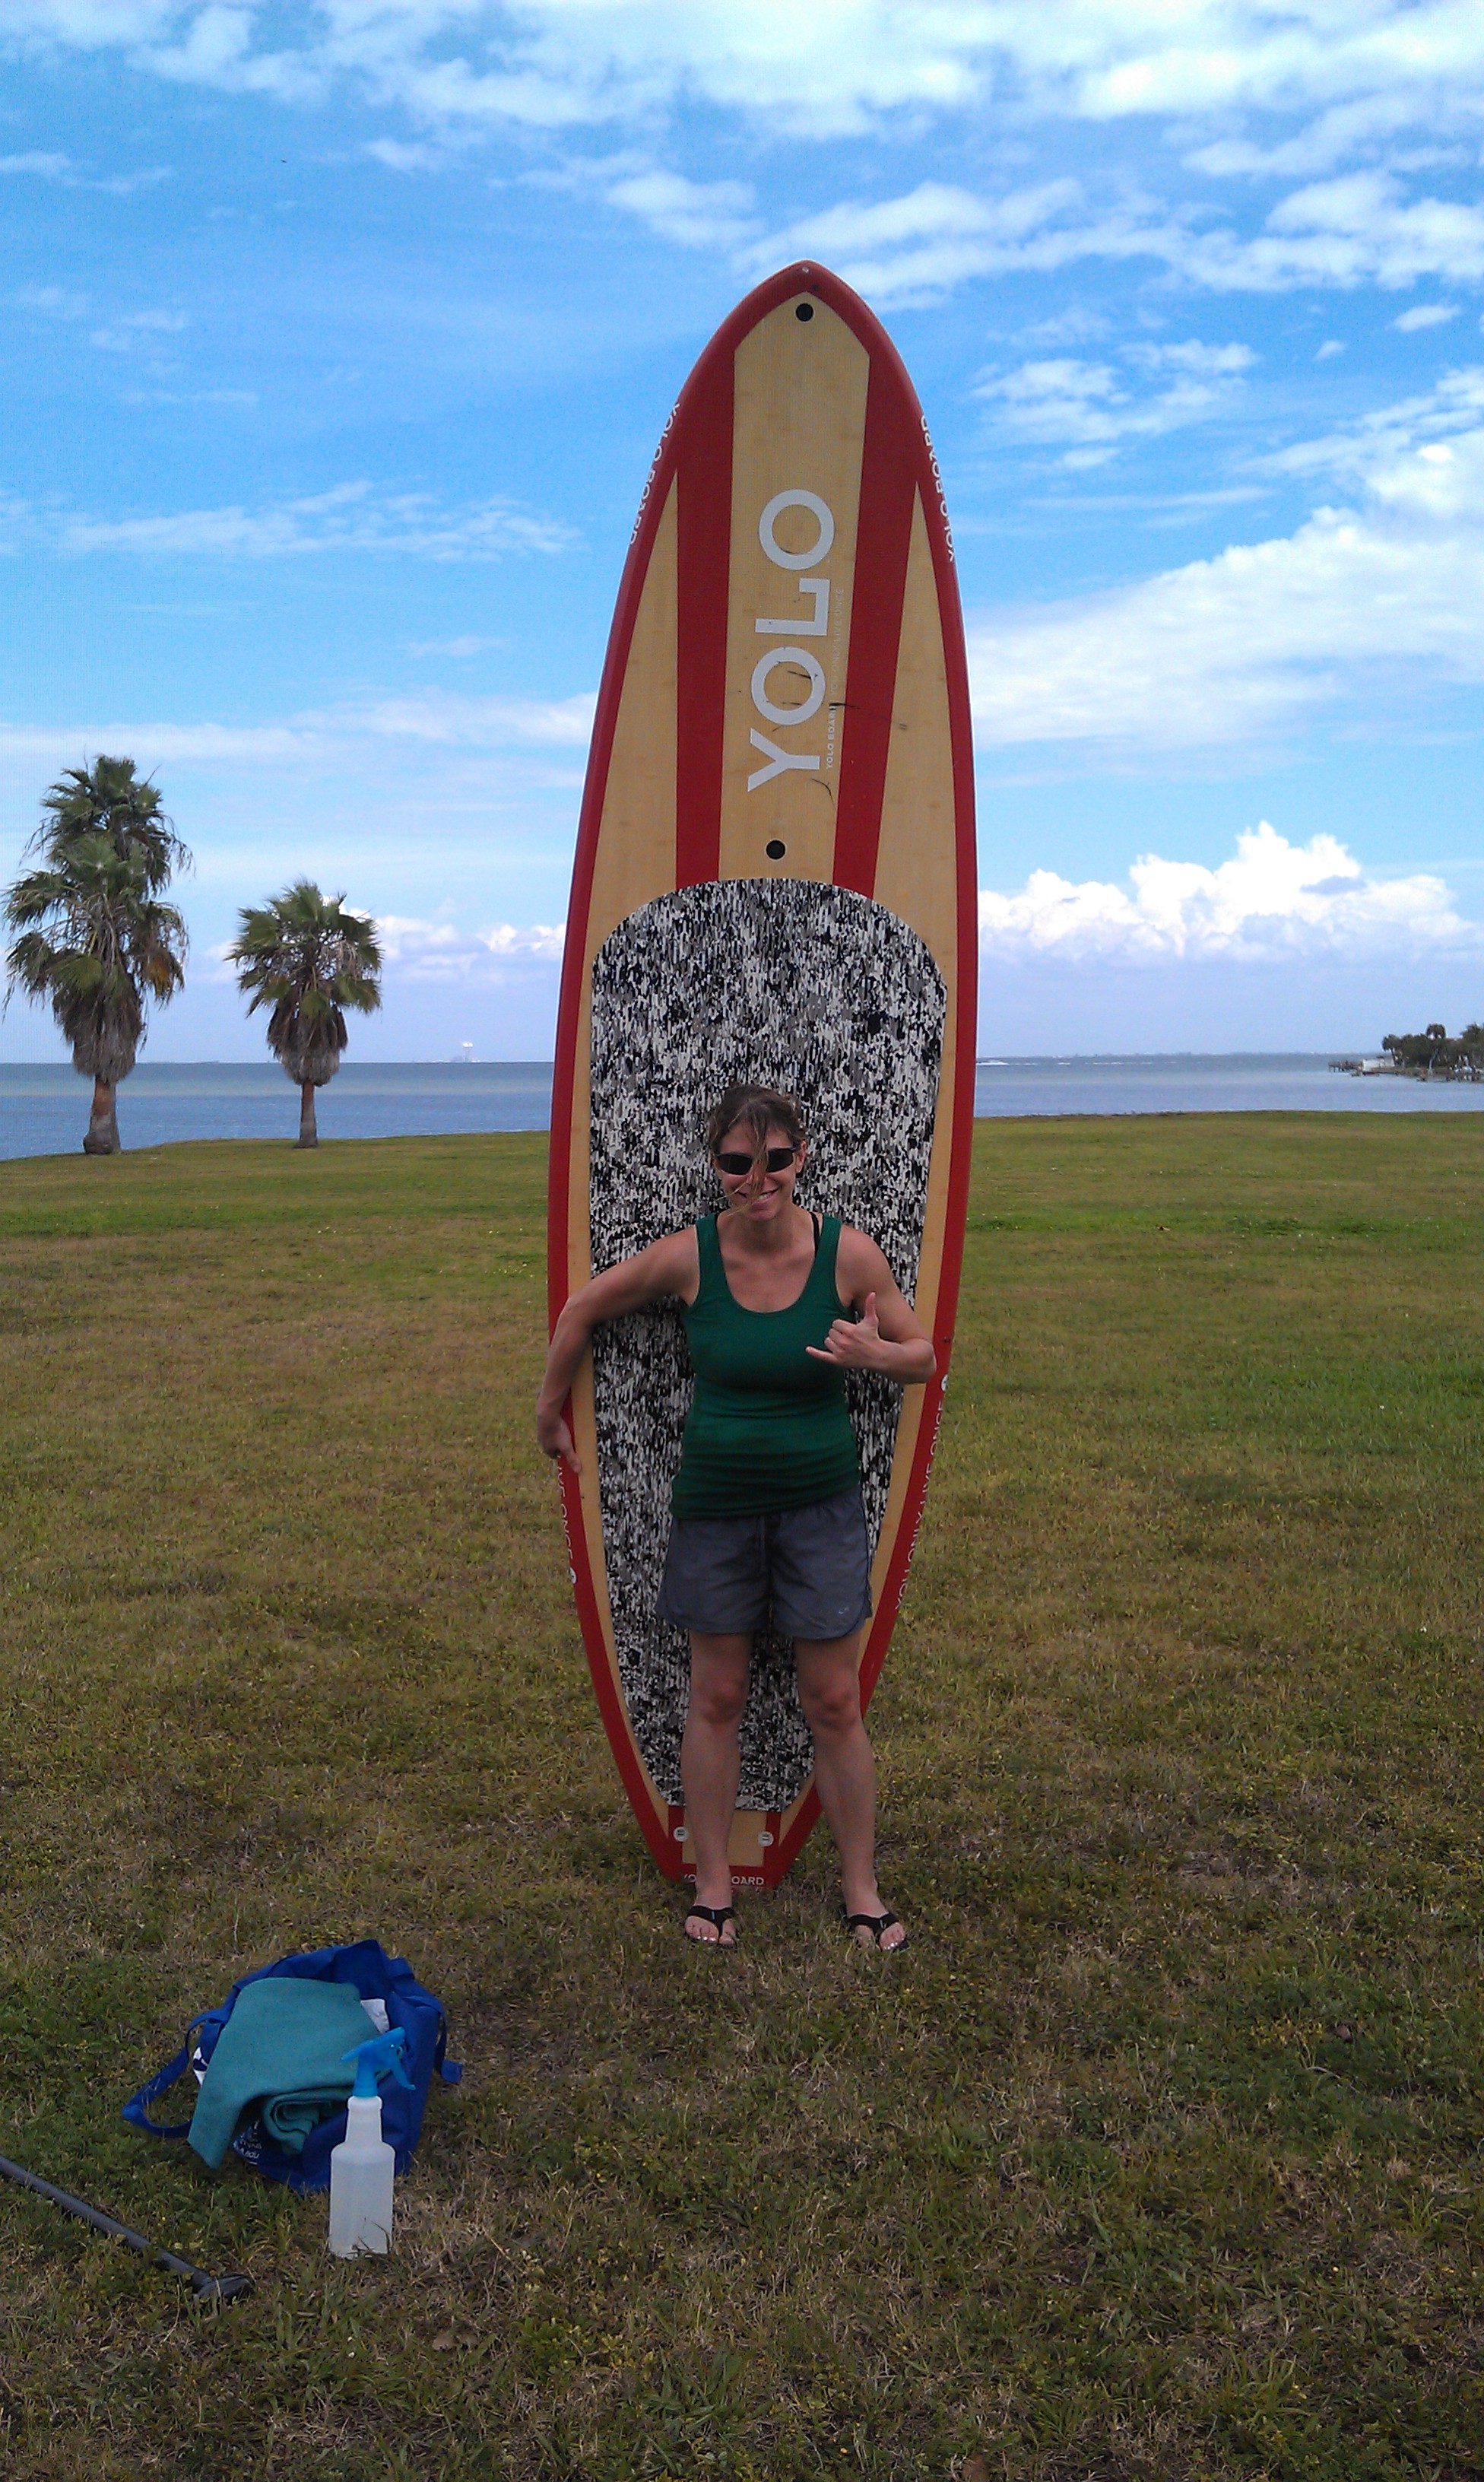 YOLO Stand Up Paddleboard – My New/Old SUP!